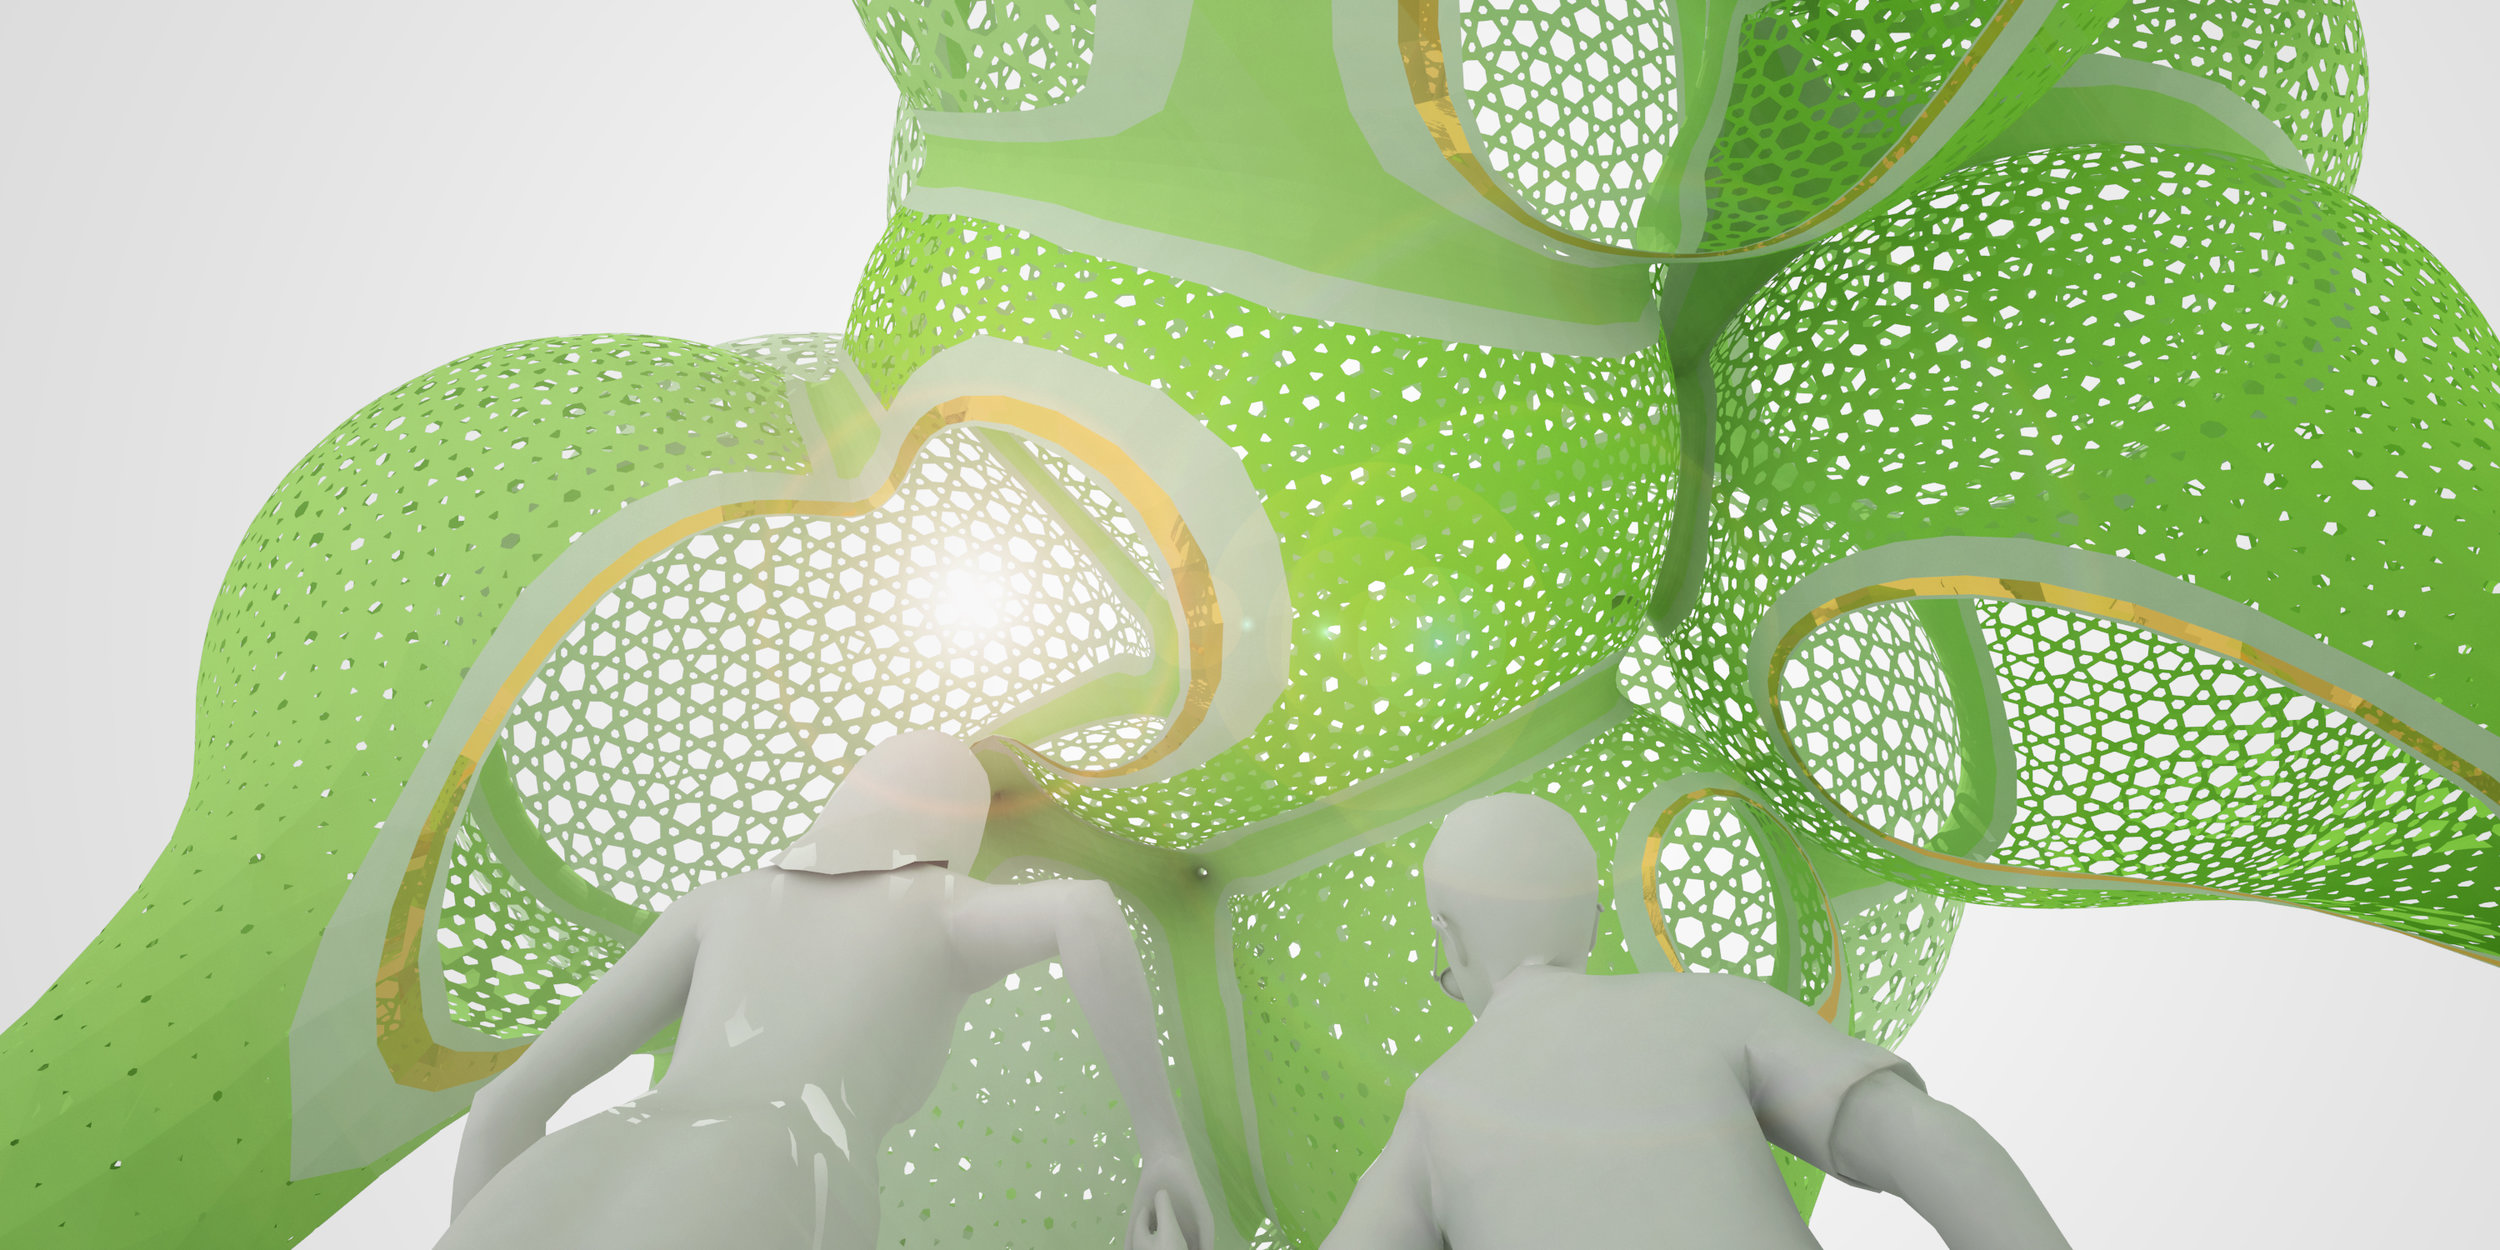 MARC FORNES / THEVERYMANY creates cloud-like pavilion in Charlotte